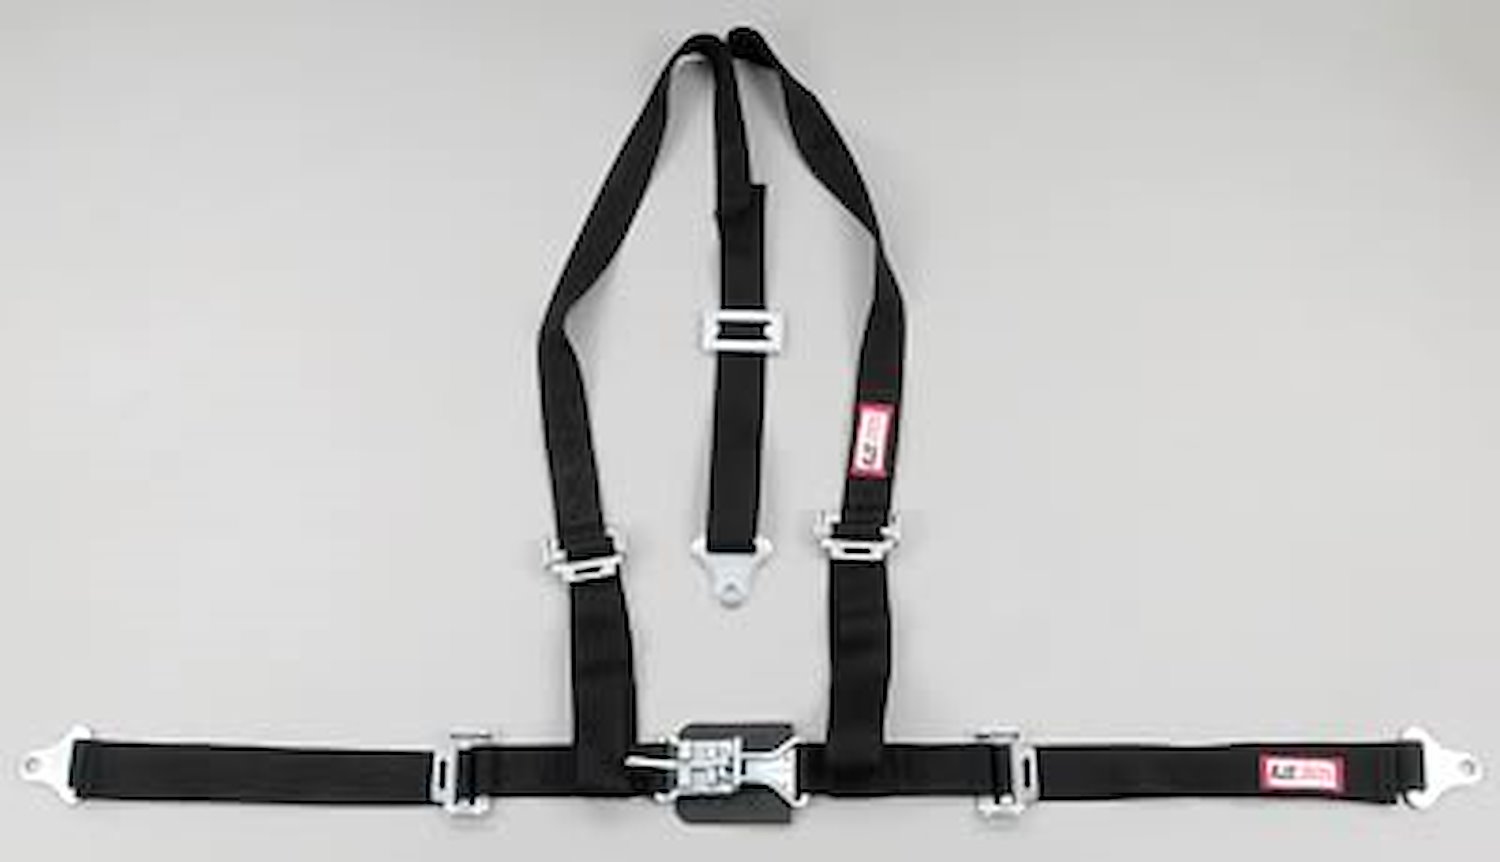 NON-SFI L&L HARNESS 3 PULL DOWN Lap Belt w/adjuster SNAP 2 S.H. Individual FLOOR Mount WRAP/SNAP GRAY